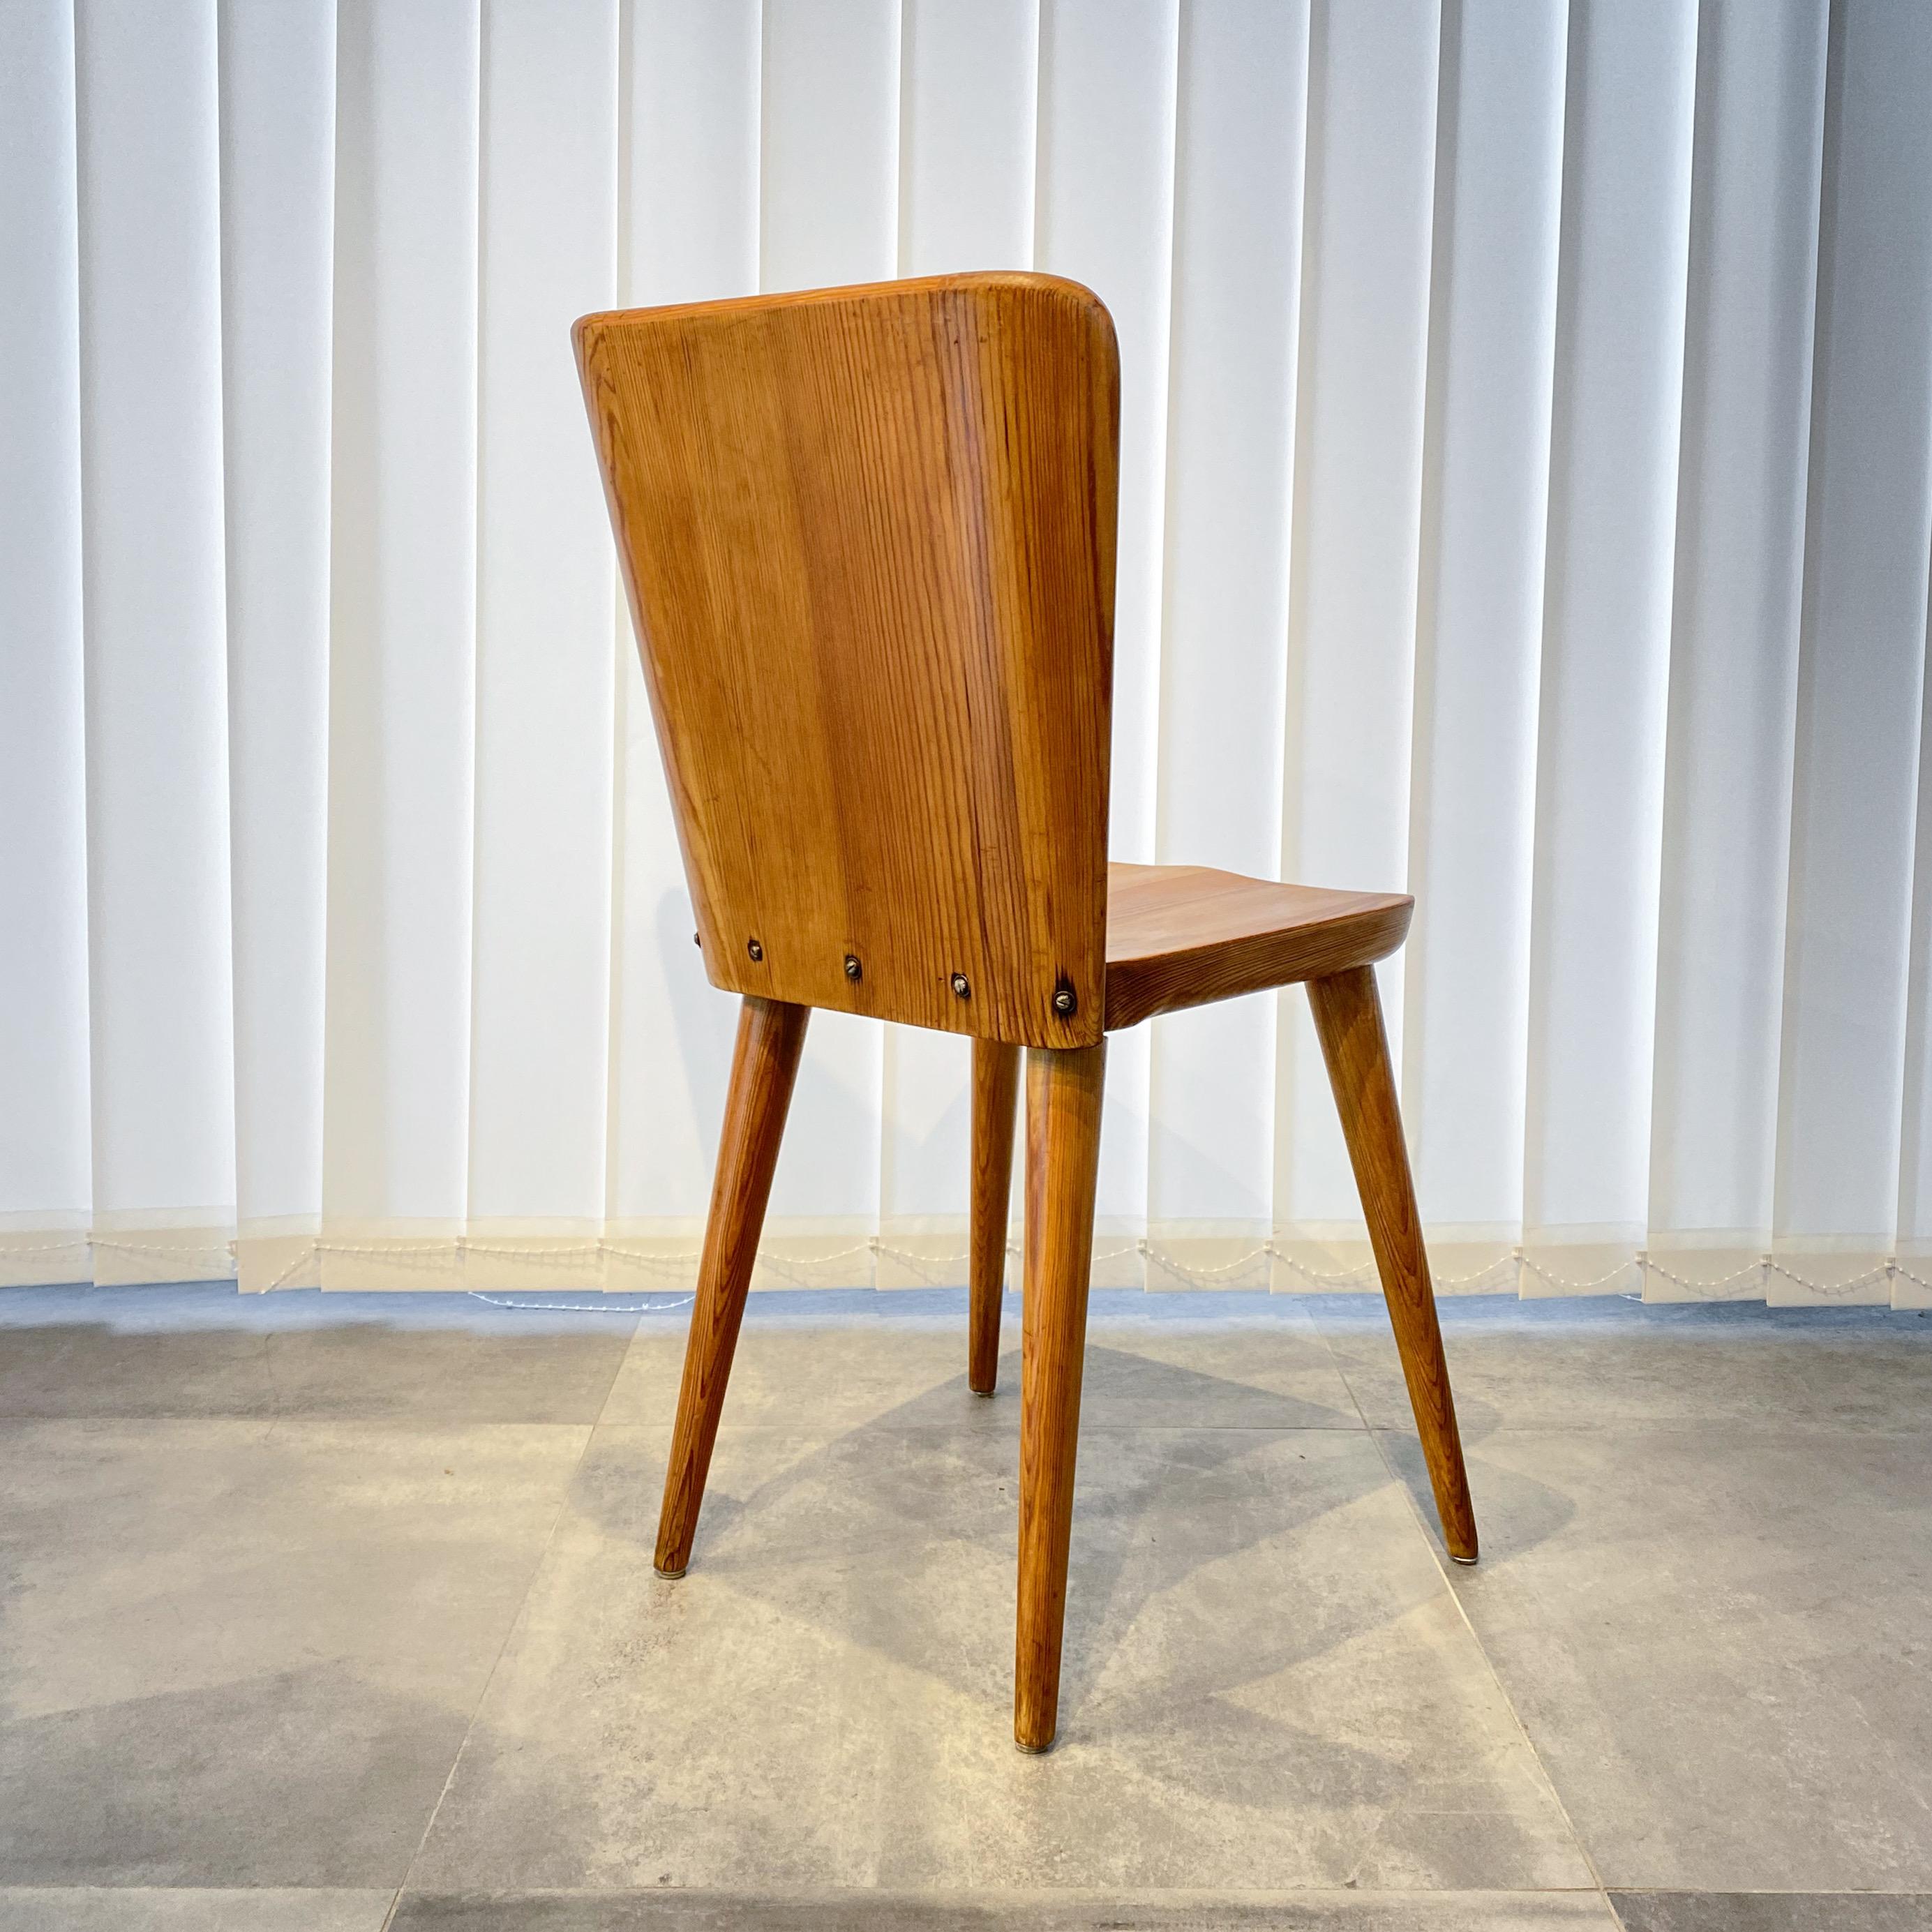 Swedish Göran Malmvall pine chair 510 by Karl Andersson & Söner, Sweden, 1940s For Sale